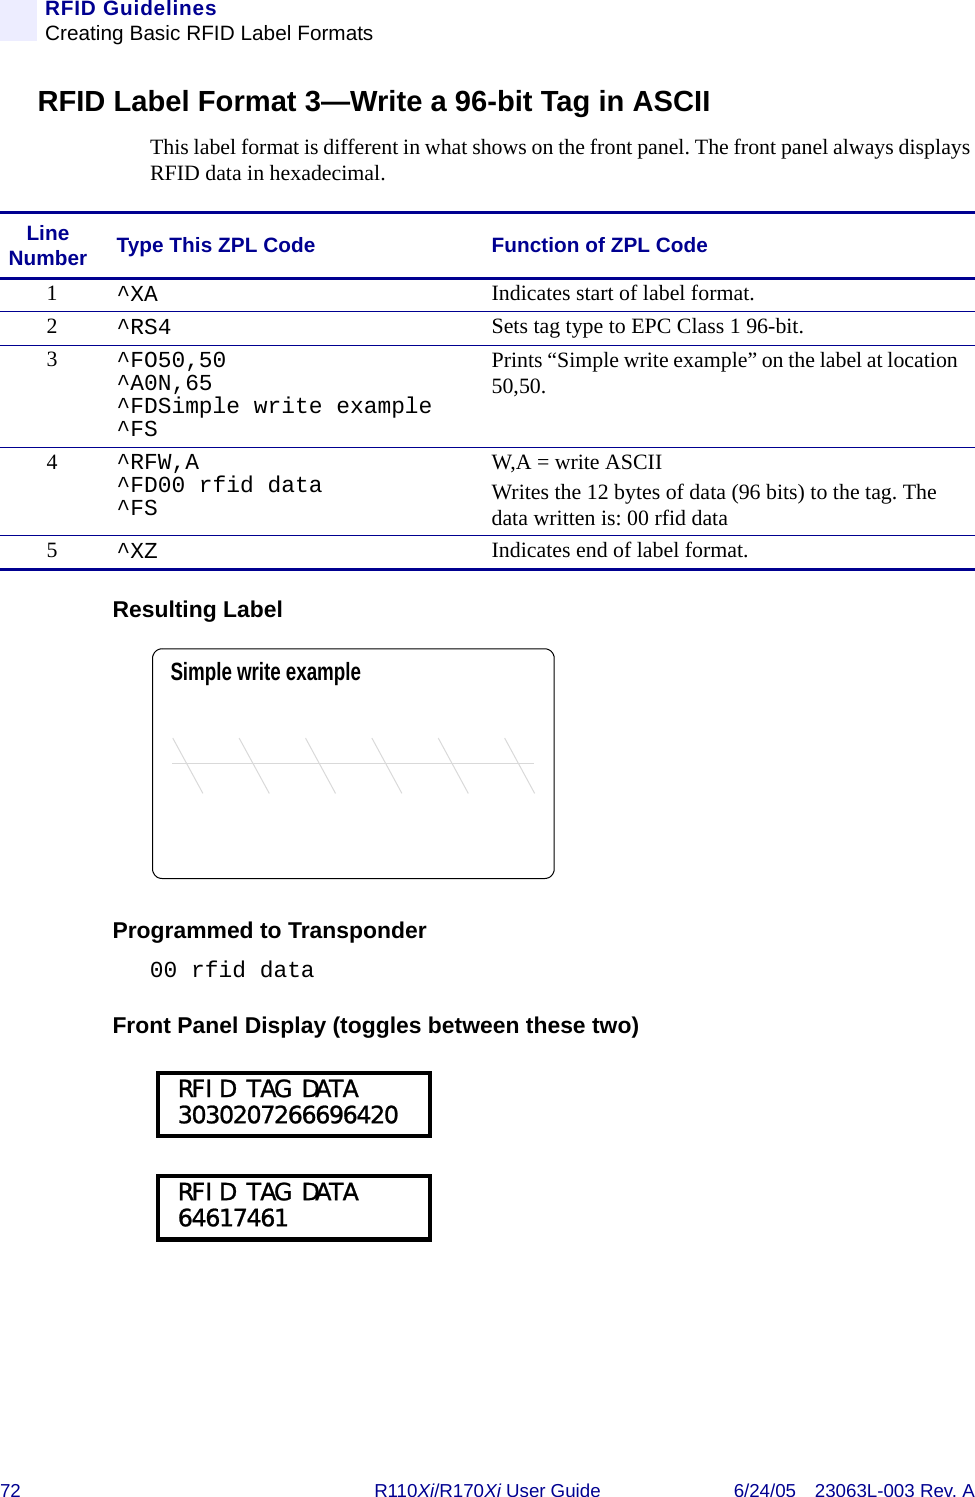 72 R110Xi/R170Xi User Guide 6/24/05 23063L-003 Rev. ARFID GuidelinesCreating Basic RFID Label FormatsRFID Label Format 3—Write a 96-bit Tag in ASCIIThis label format is different in what shows on the front panel. The front panel always displays RFID data in hexadecimal.Resulting LabelProgrammed to Transponder00 rfid dataFront Panel Display (toggles between these two)Line Number Type This ZPL Code Function of ZPL Code1^XA Indicates start of label format.2^RS4 Sets tag type to EPC Class 1 96-bit.3^FO50,50^A0N,65^FDSimple write example^FSPrints “Simple write example” on the label at location 50,50.4^RFW,A^FD00 rfid data^FSW,A = write ASCIIWrites the 12 bytes of data (96 bits) to the tag. The data written is: 00 rfid data5^XZ Indicates end of label format.Simple write example RFID TAG DATA 3030207266696420 RFID TAG DATA 64617461